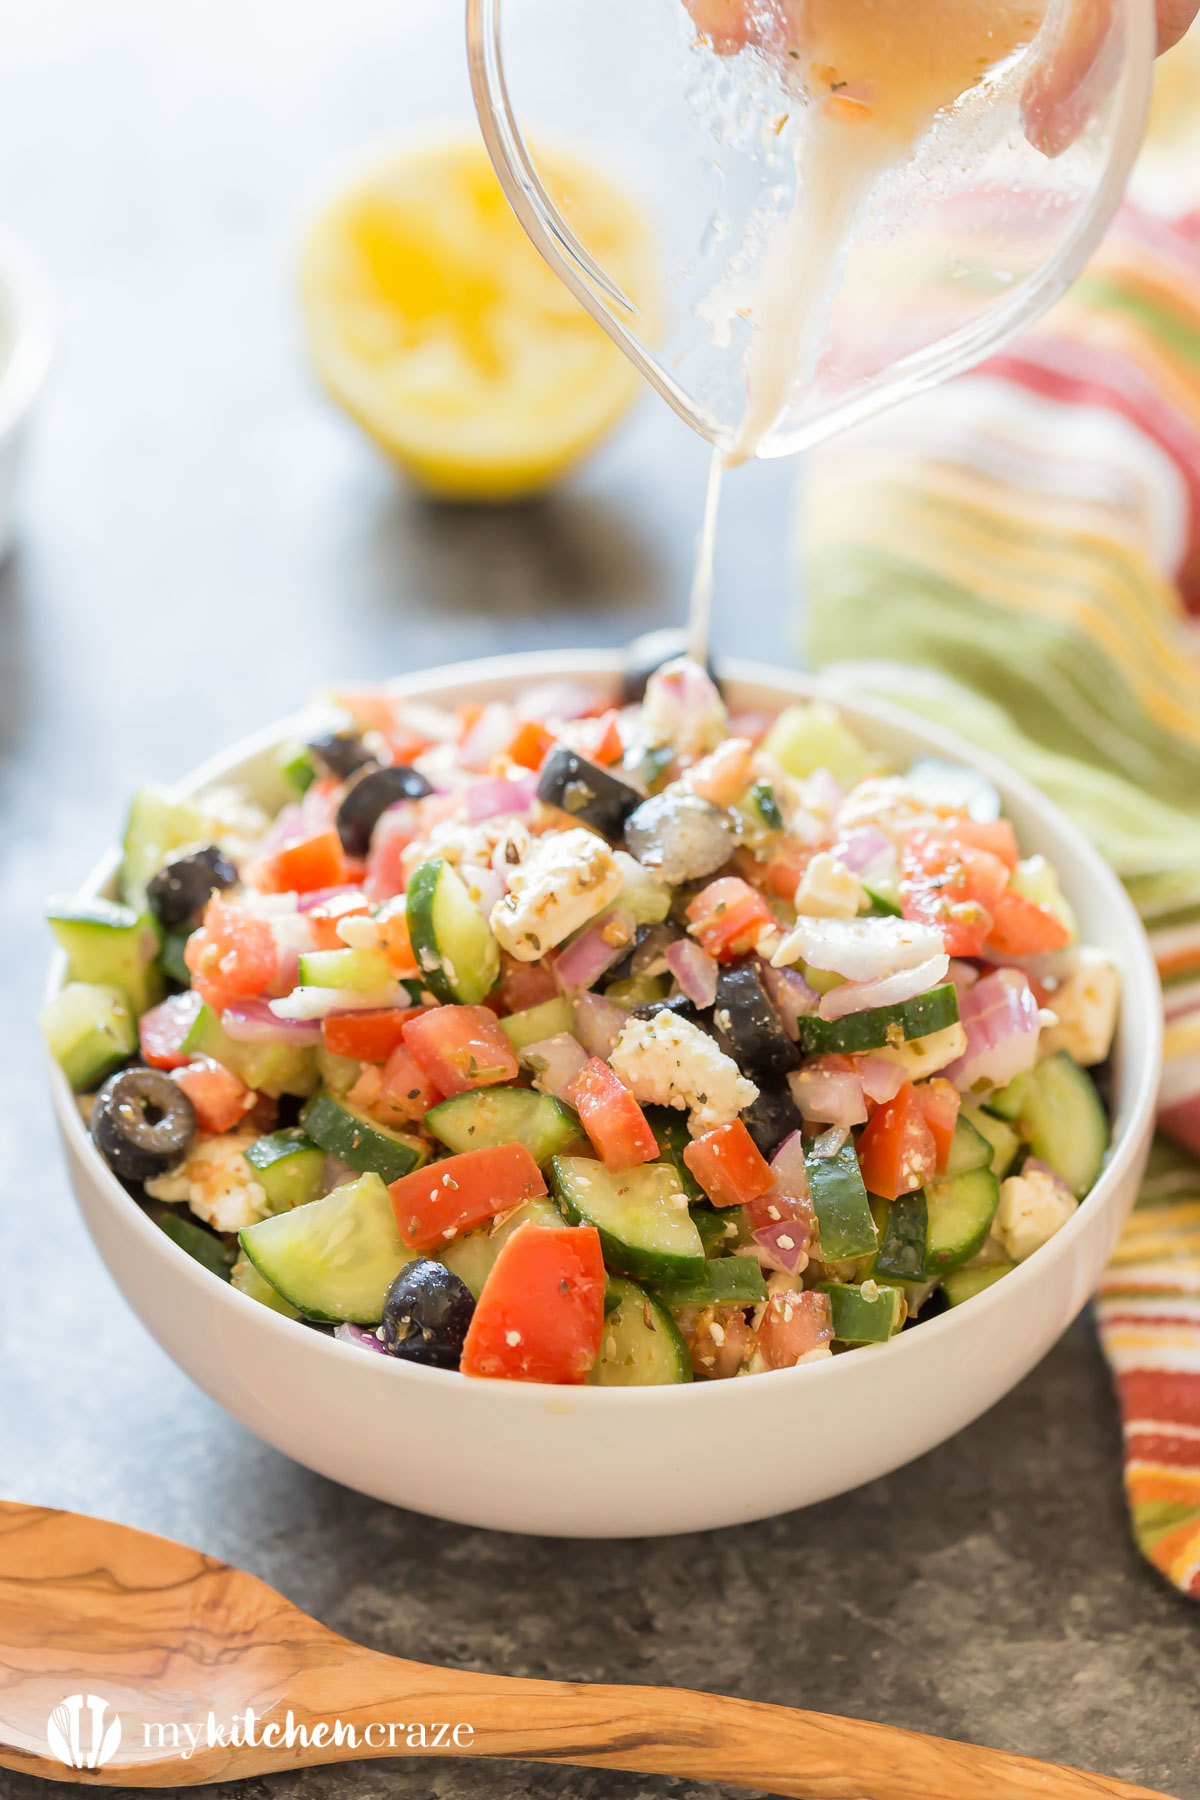 Greek Salad is perfect with any main dish. Throw it together and have a delicious side within minutes!